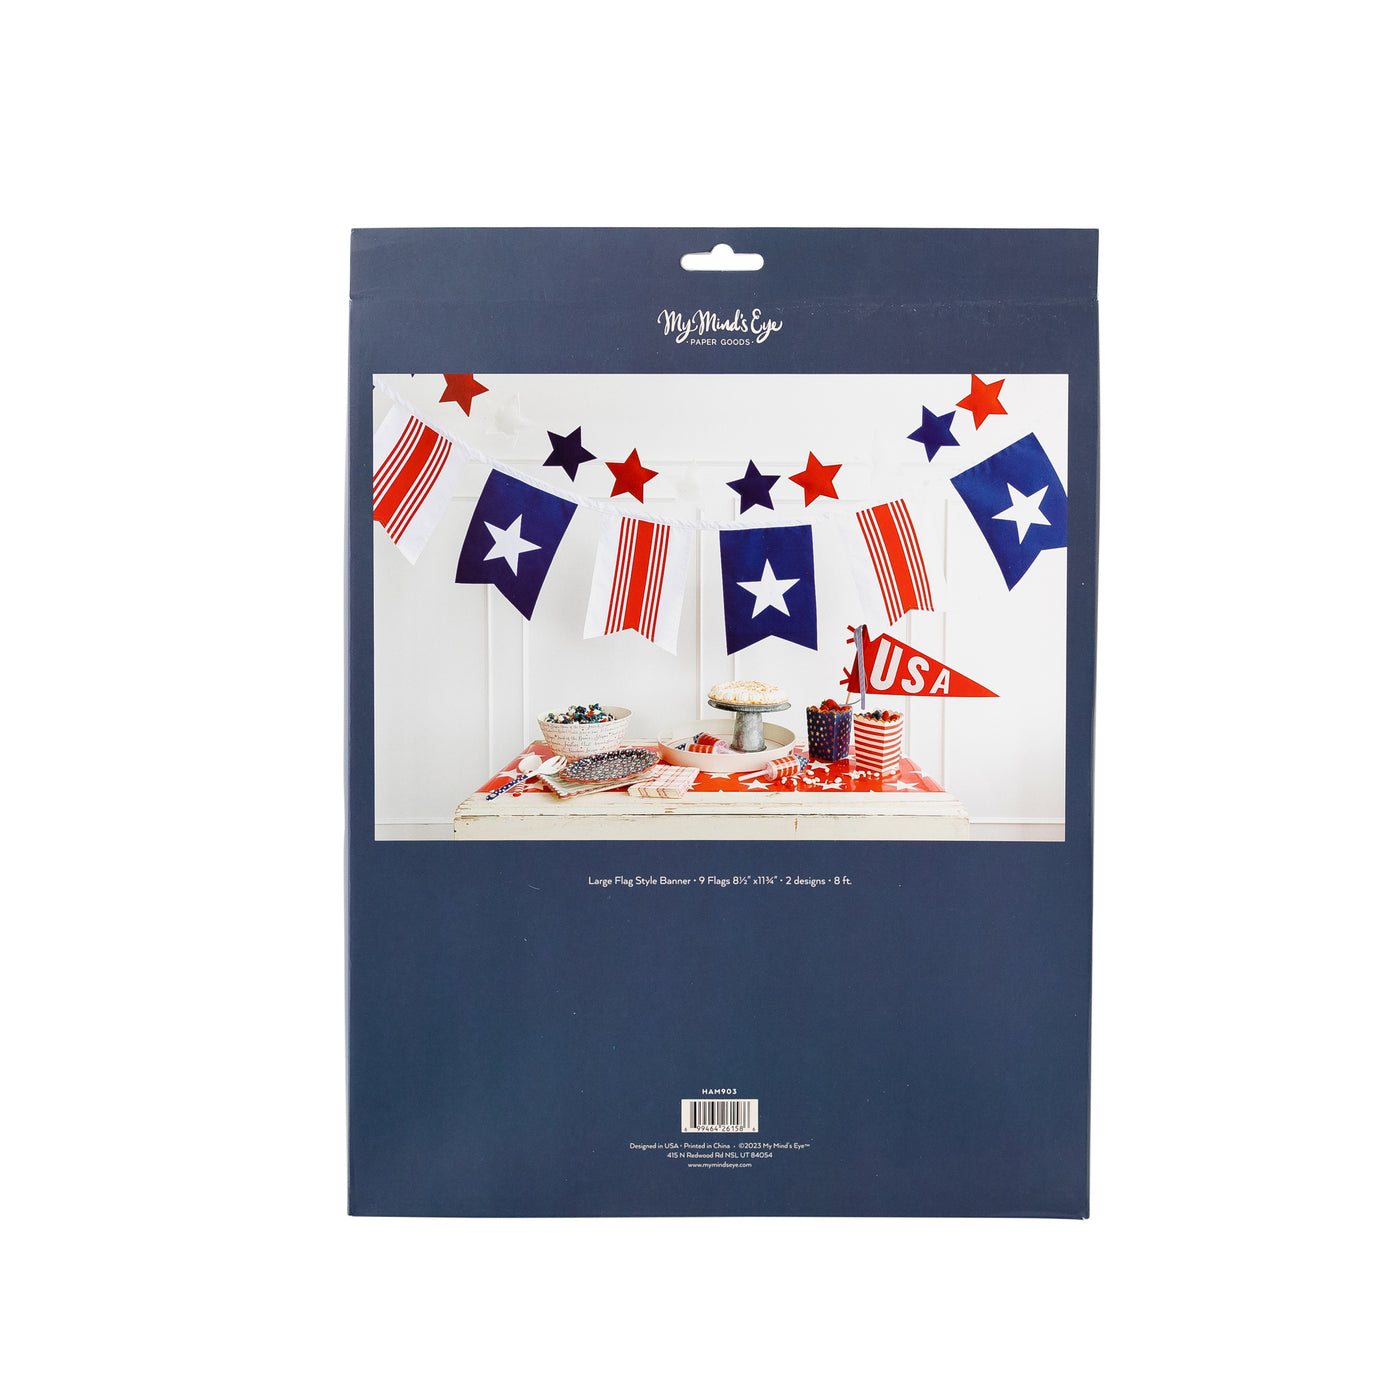 Hamptons Oversized Outdoor Fabric Flag Pennant Banner